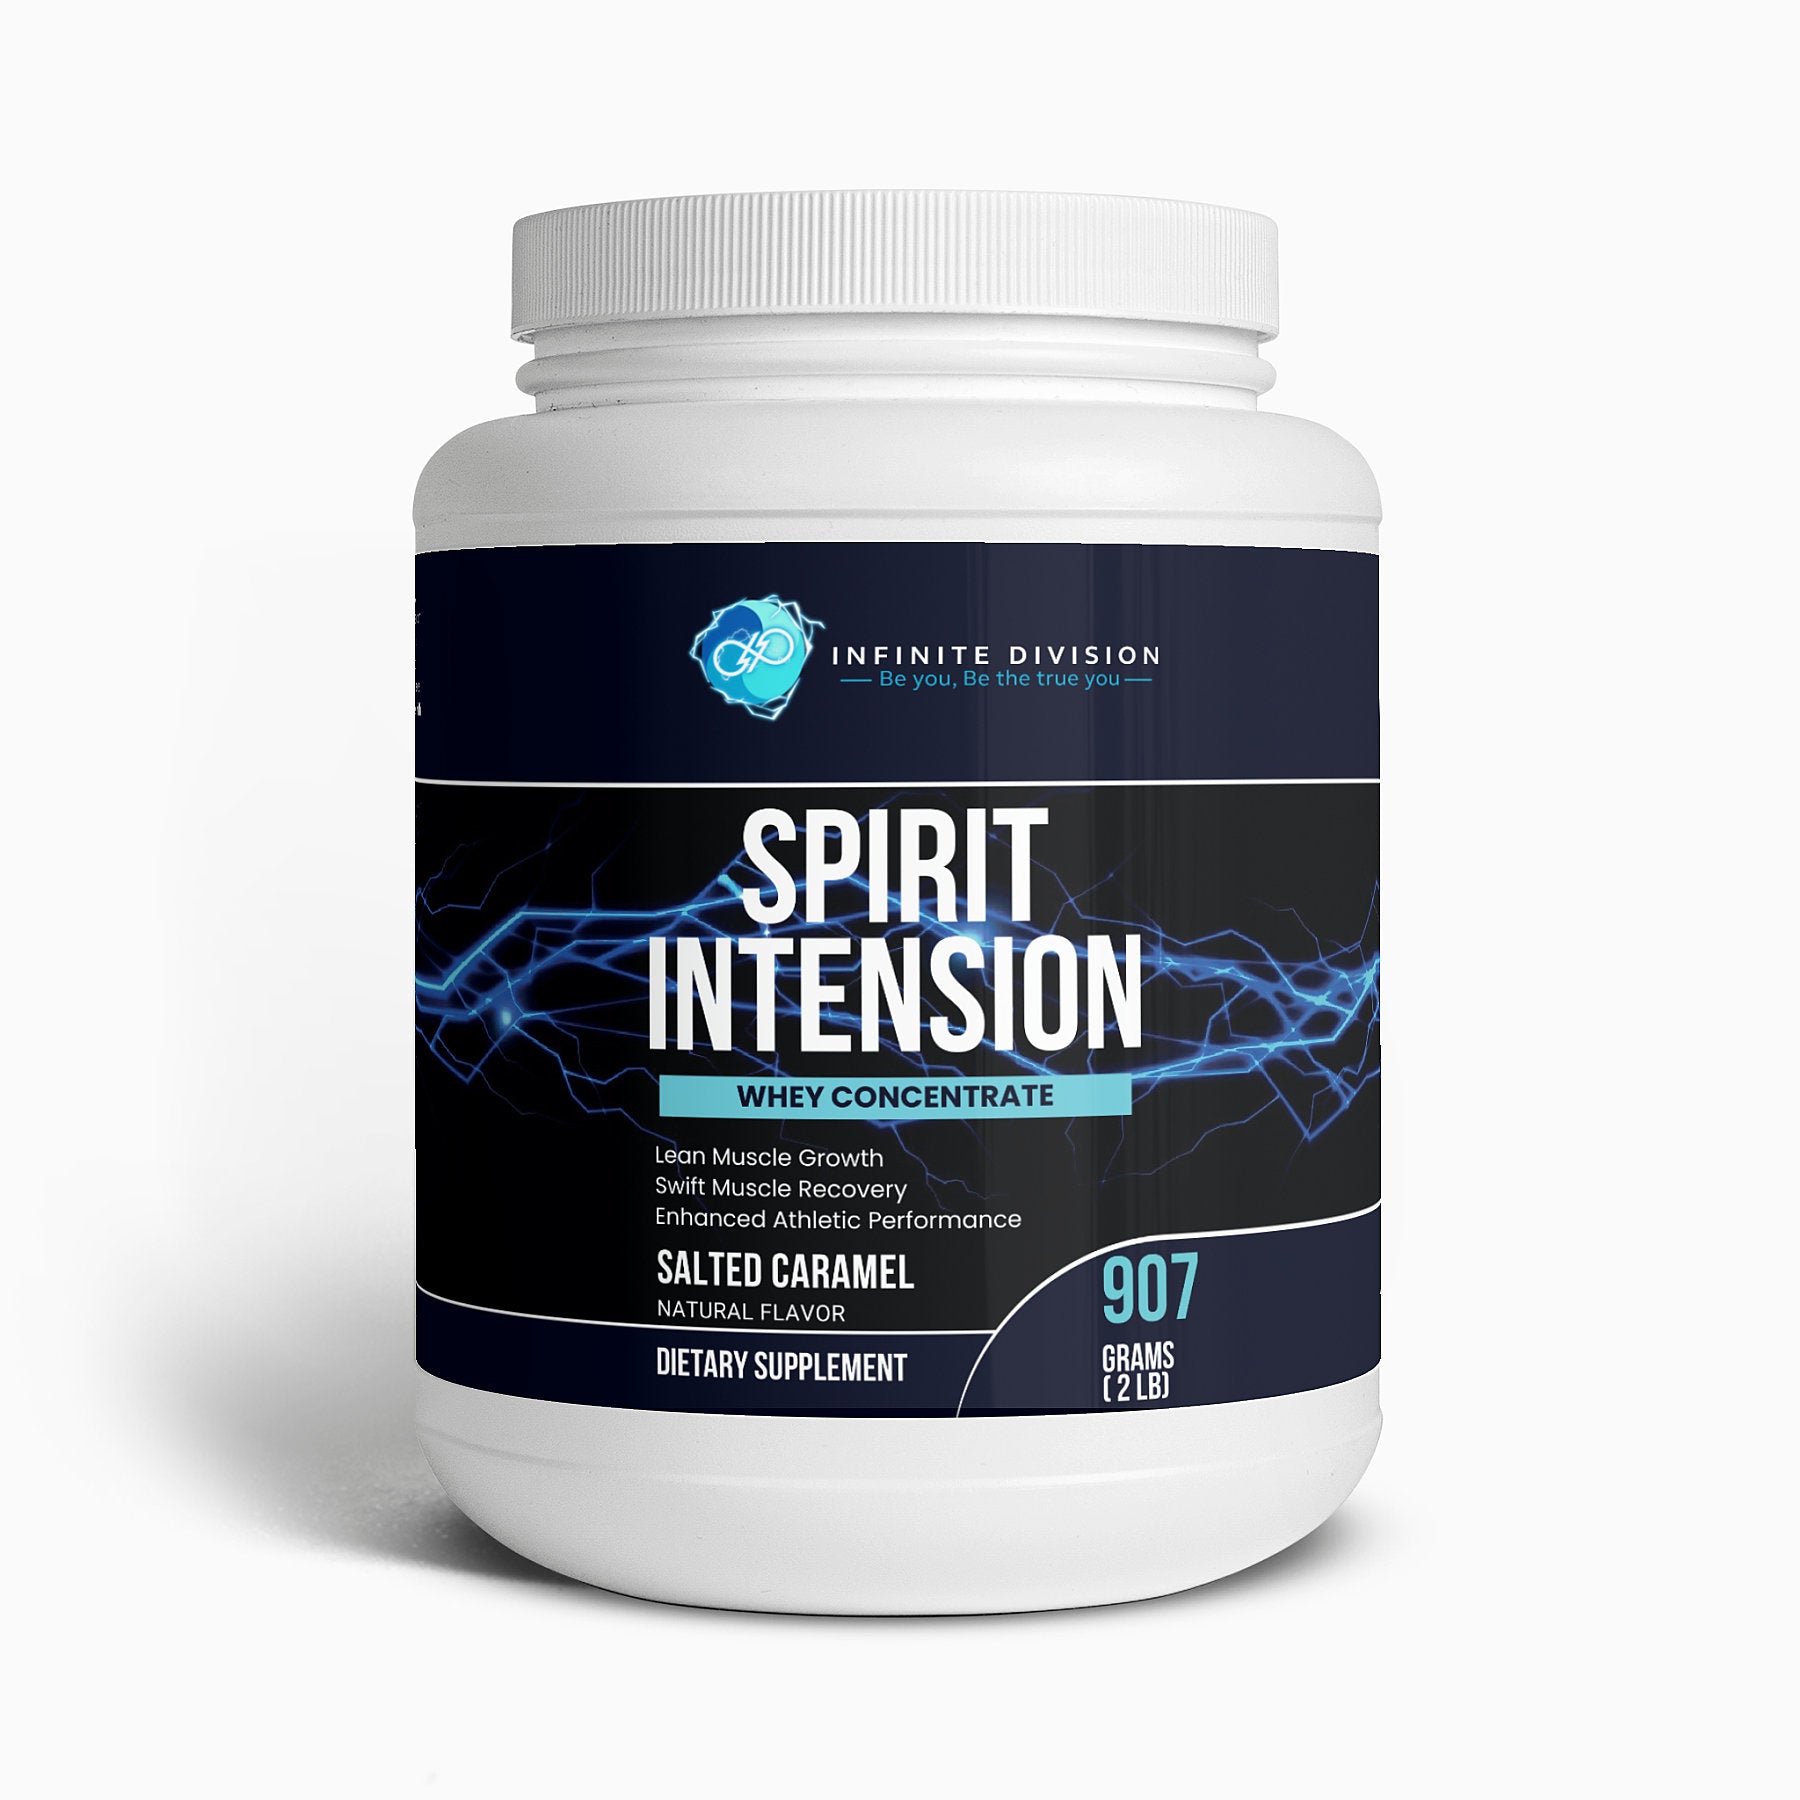 Spirit Intension: Whey Concentrate